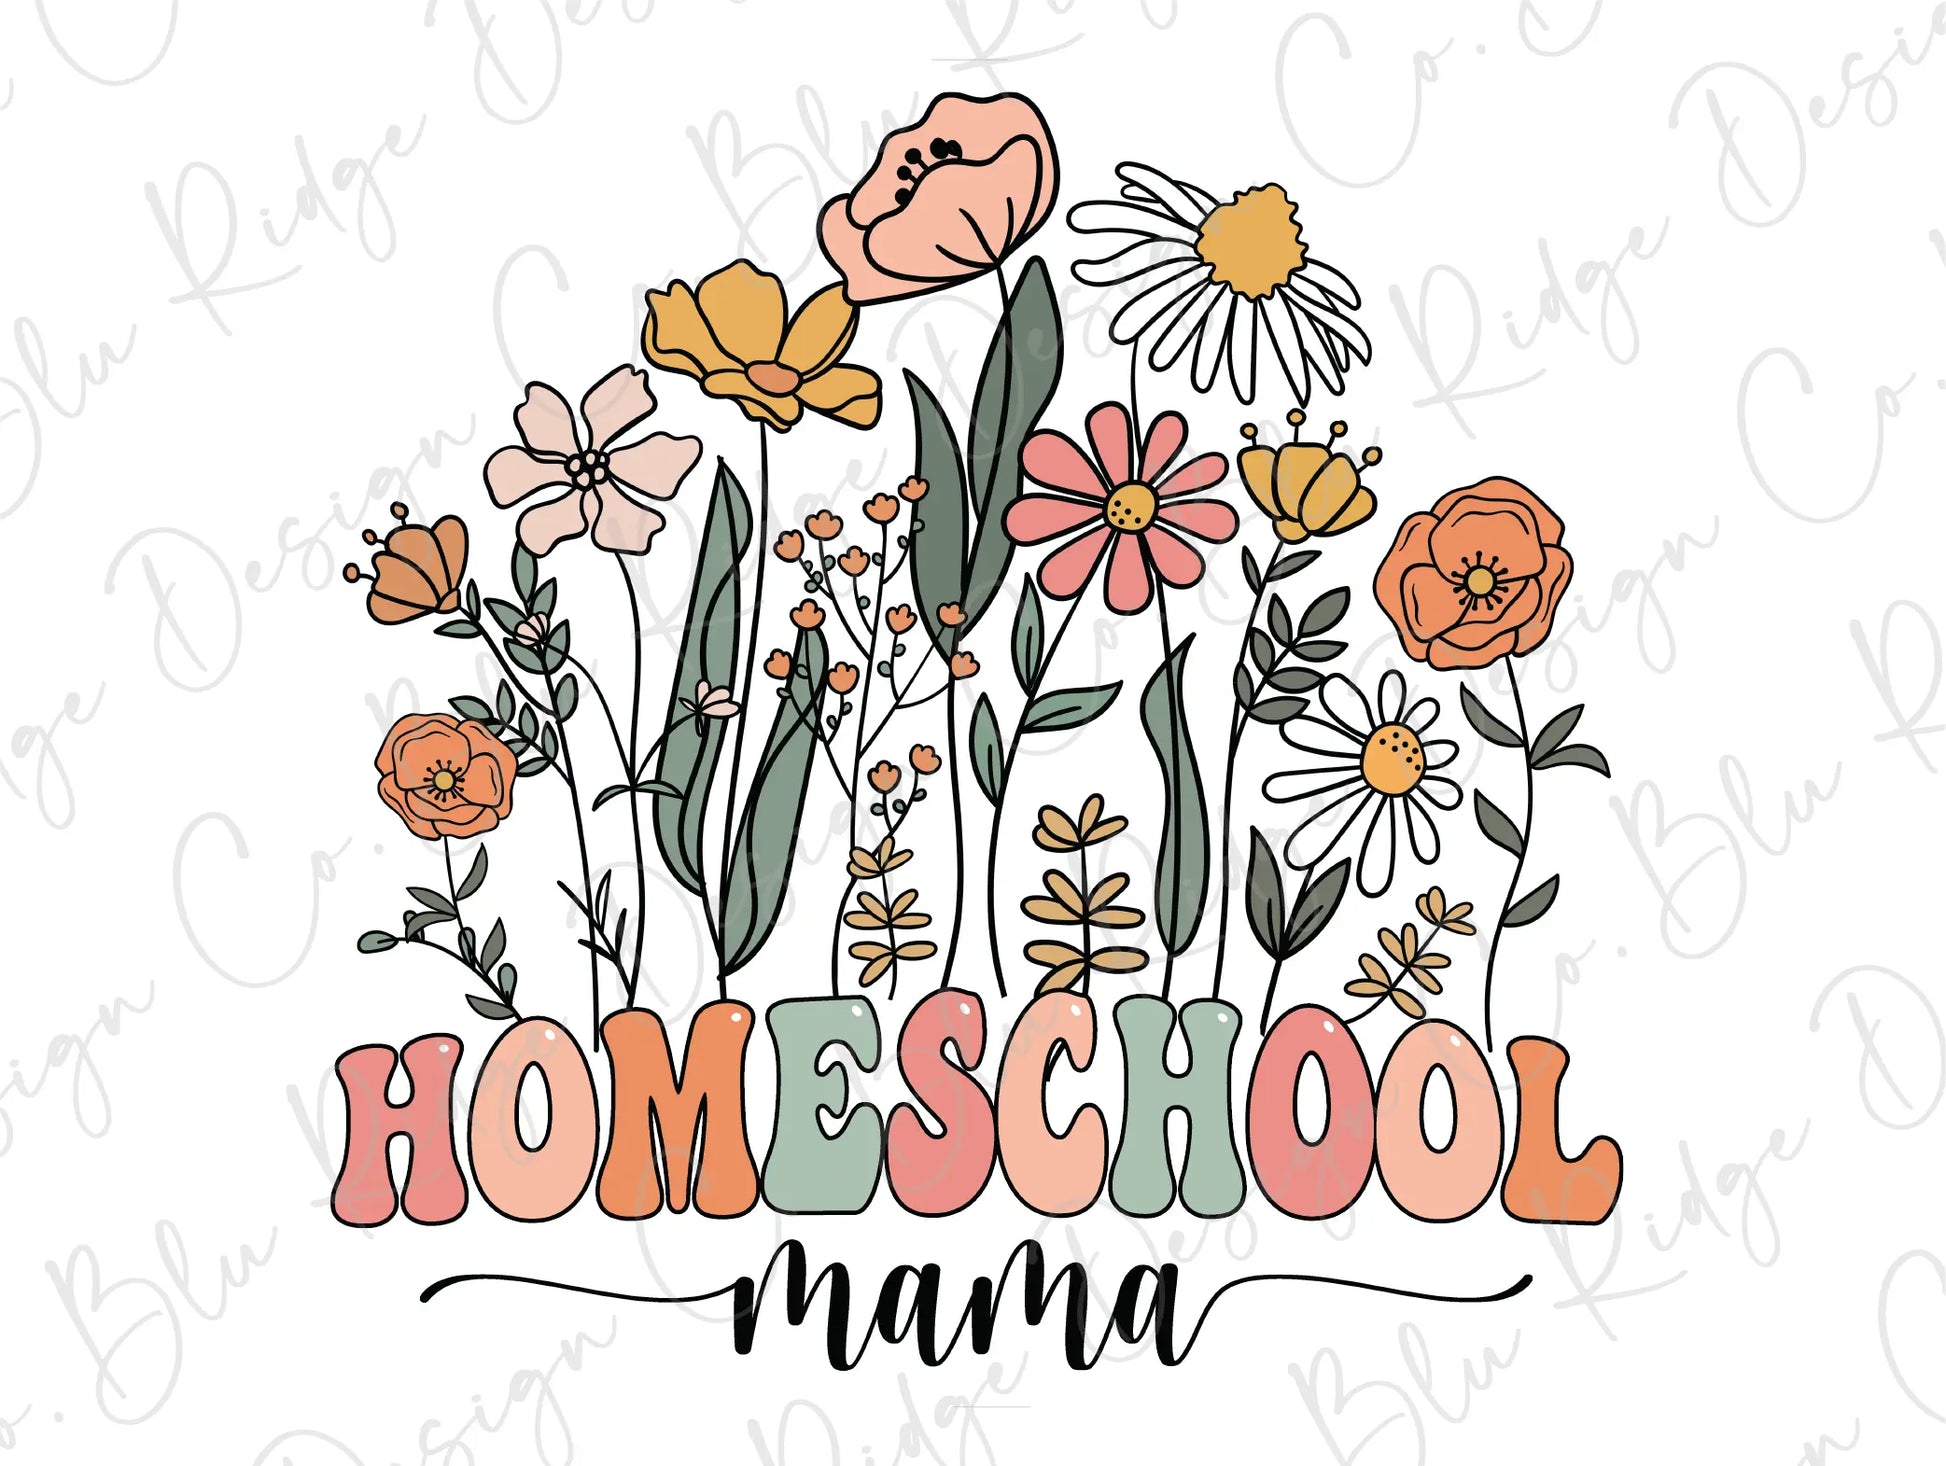 a drawing of flowers and the words homeschool mama